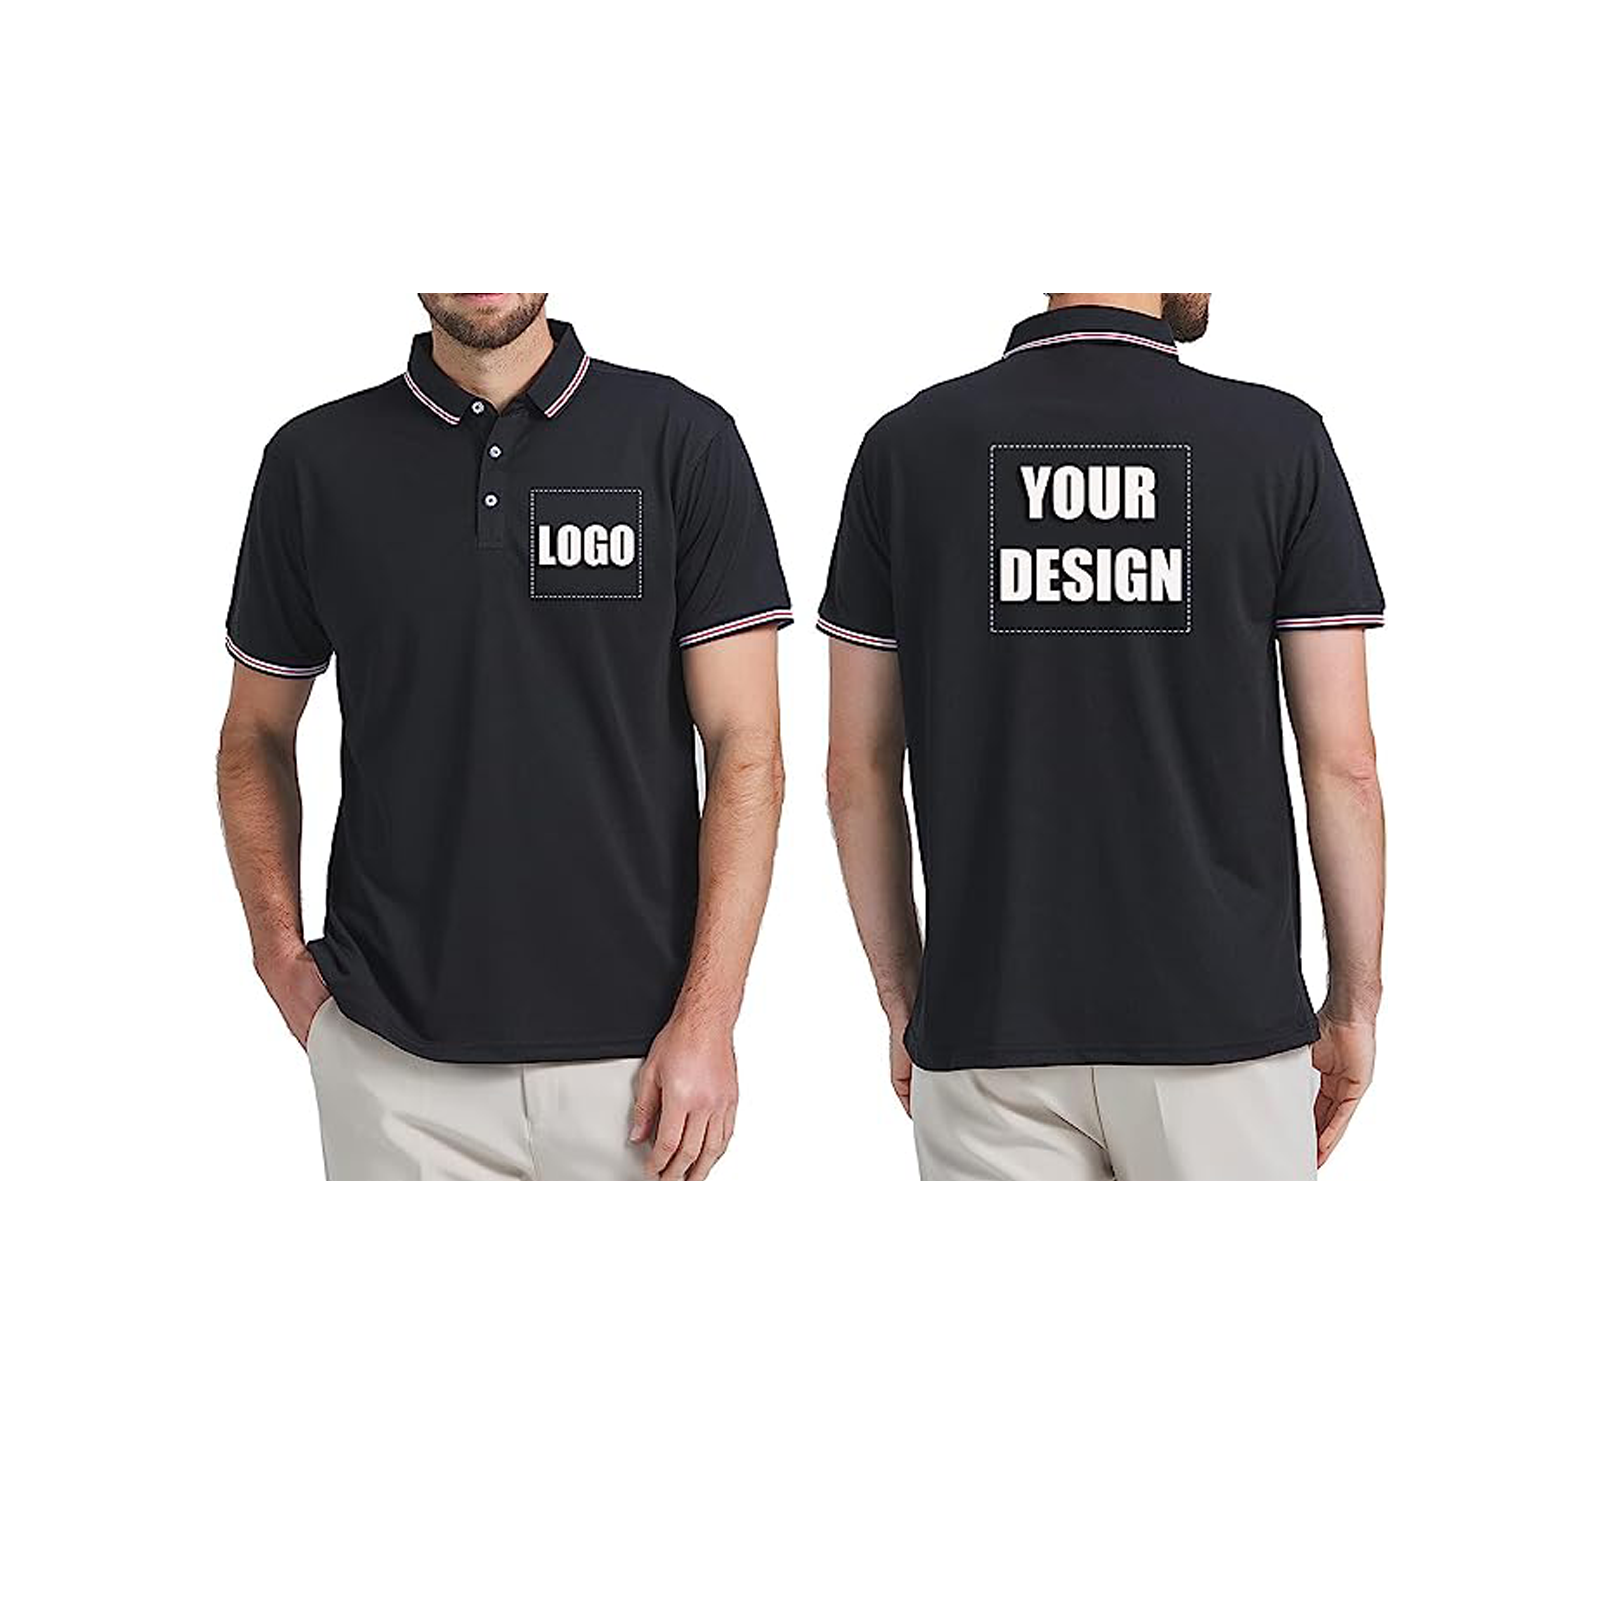 Free Customized Polo Shirts with Logo for Men Woman Personalized Polo T-Shirts Print Your Own Design Shirt